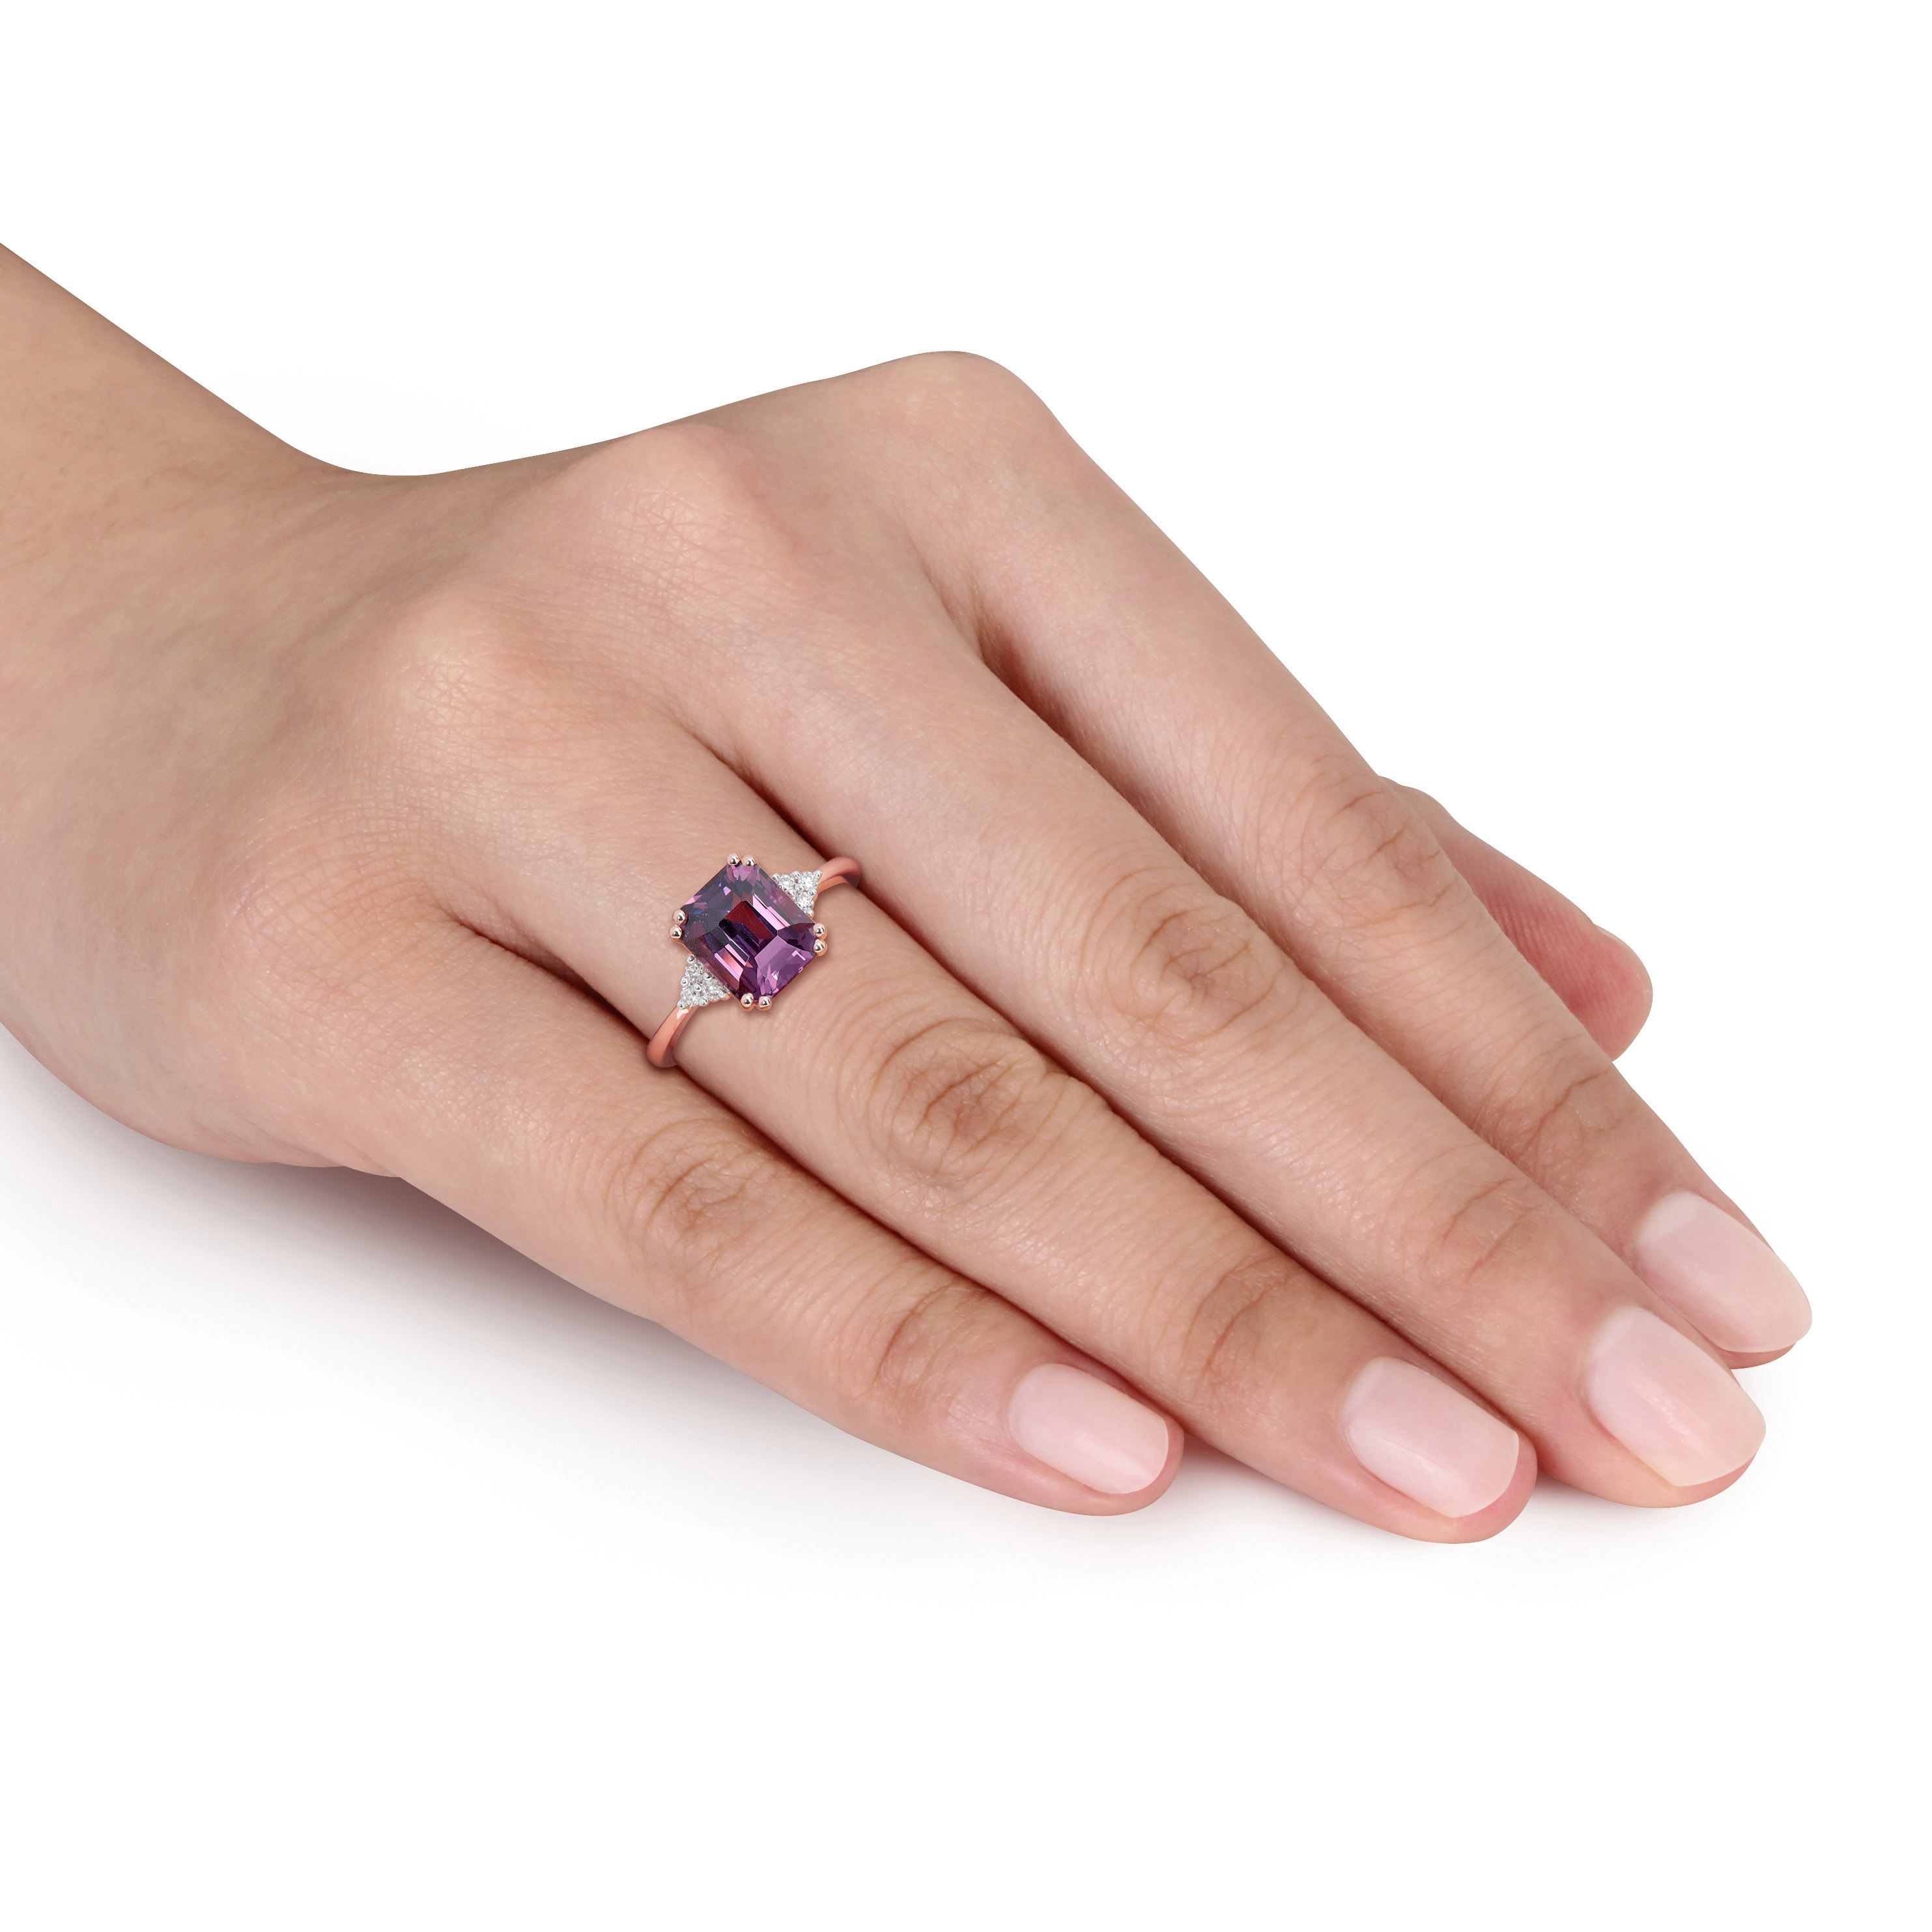 3 CT TGW Octagon-Cut Violet Spinel and 1/10 CT TDW Diamond Cocktail Ring in 14k Rose Gold